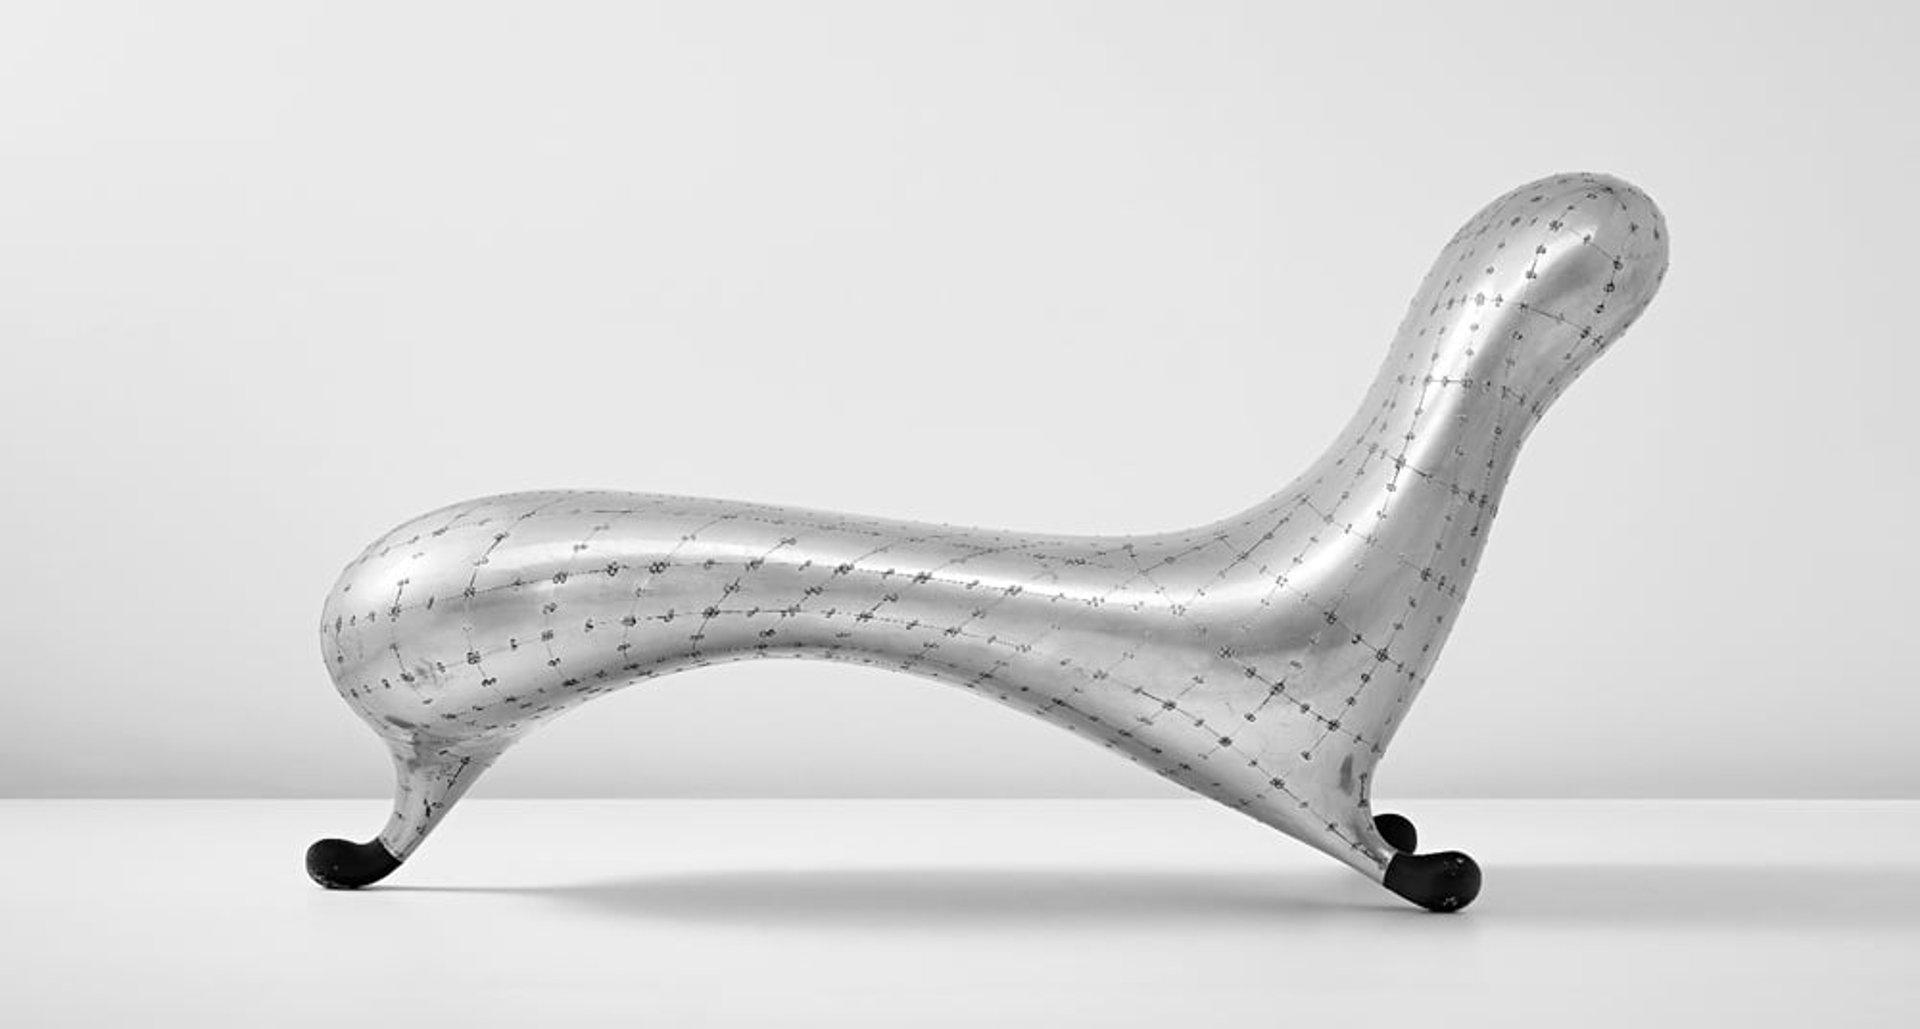 Marc Newson's most iconic designs